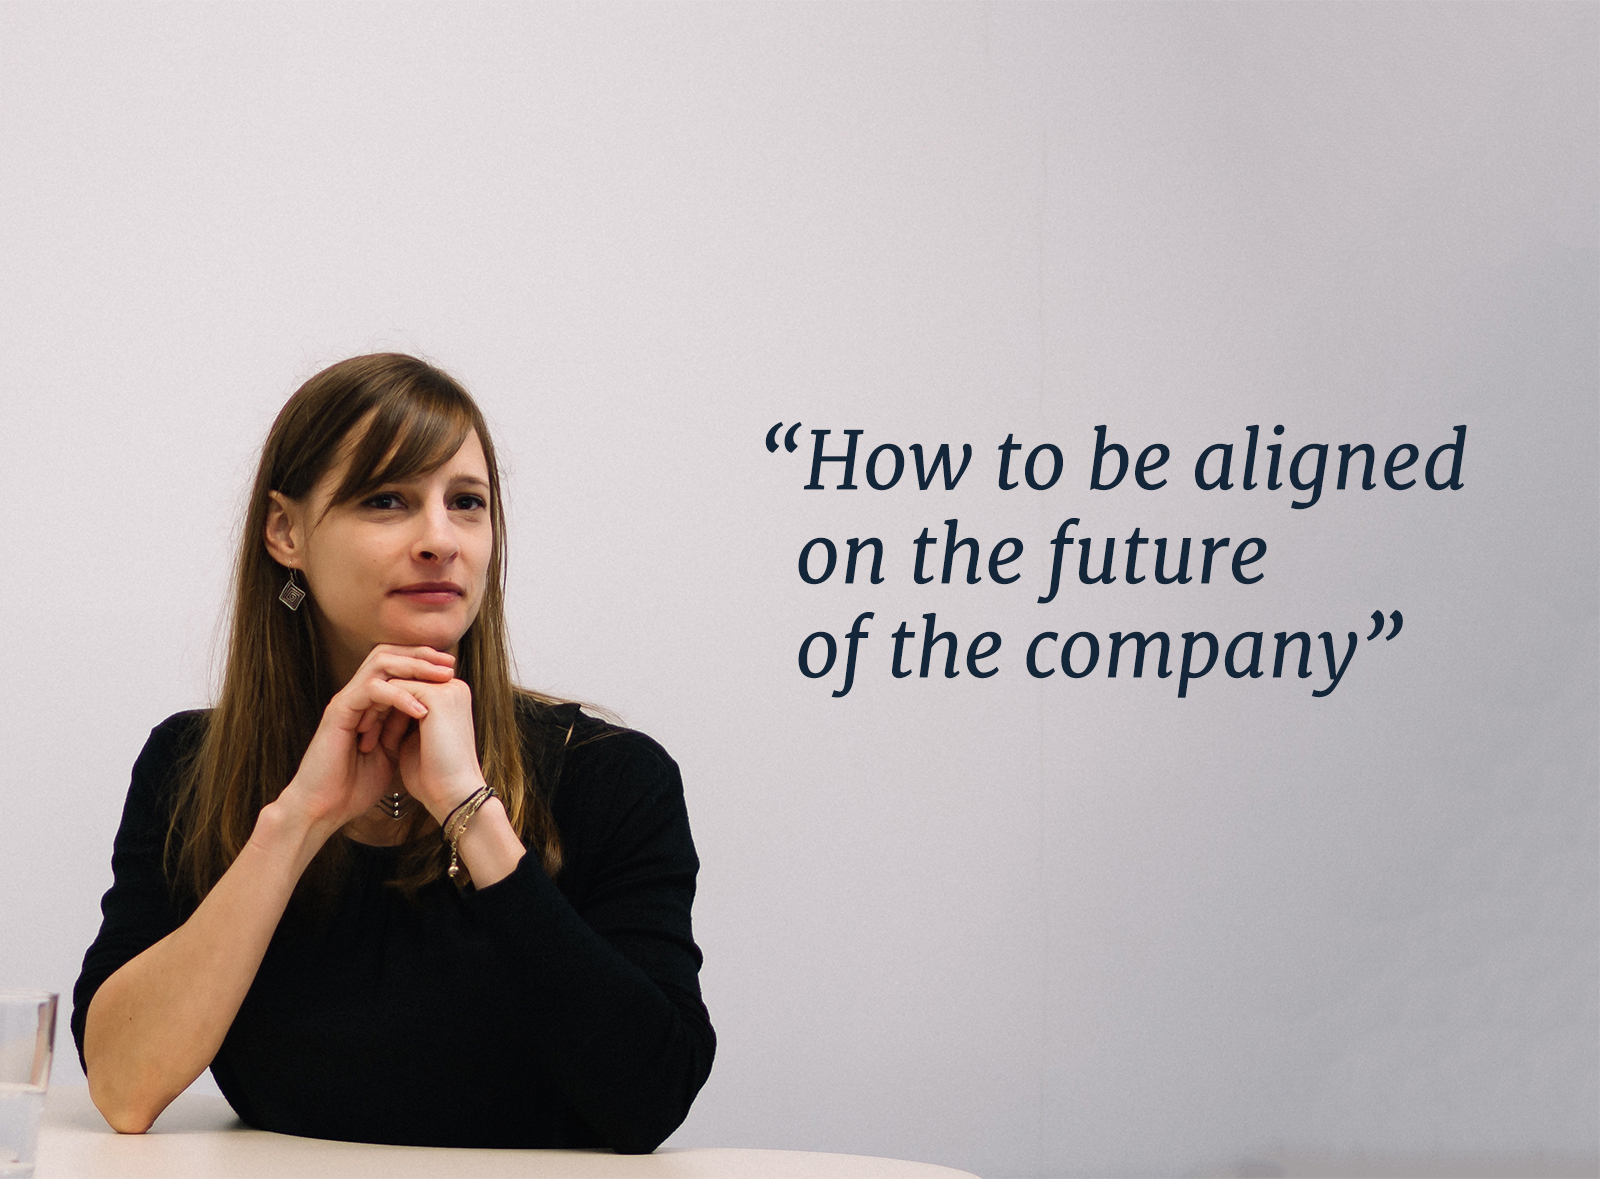 How to be aligned on the future of the company